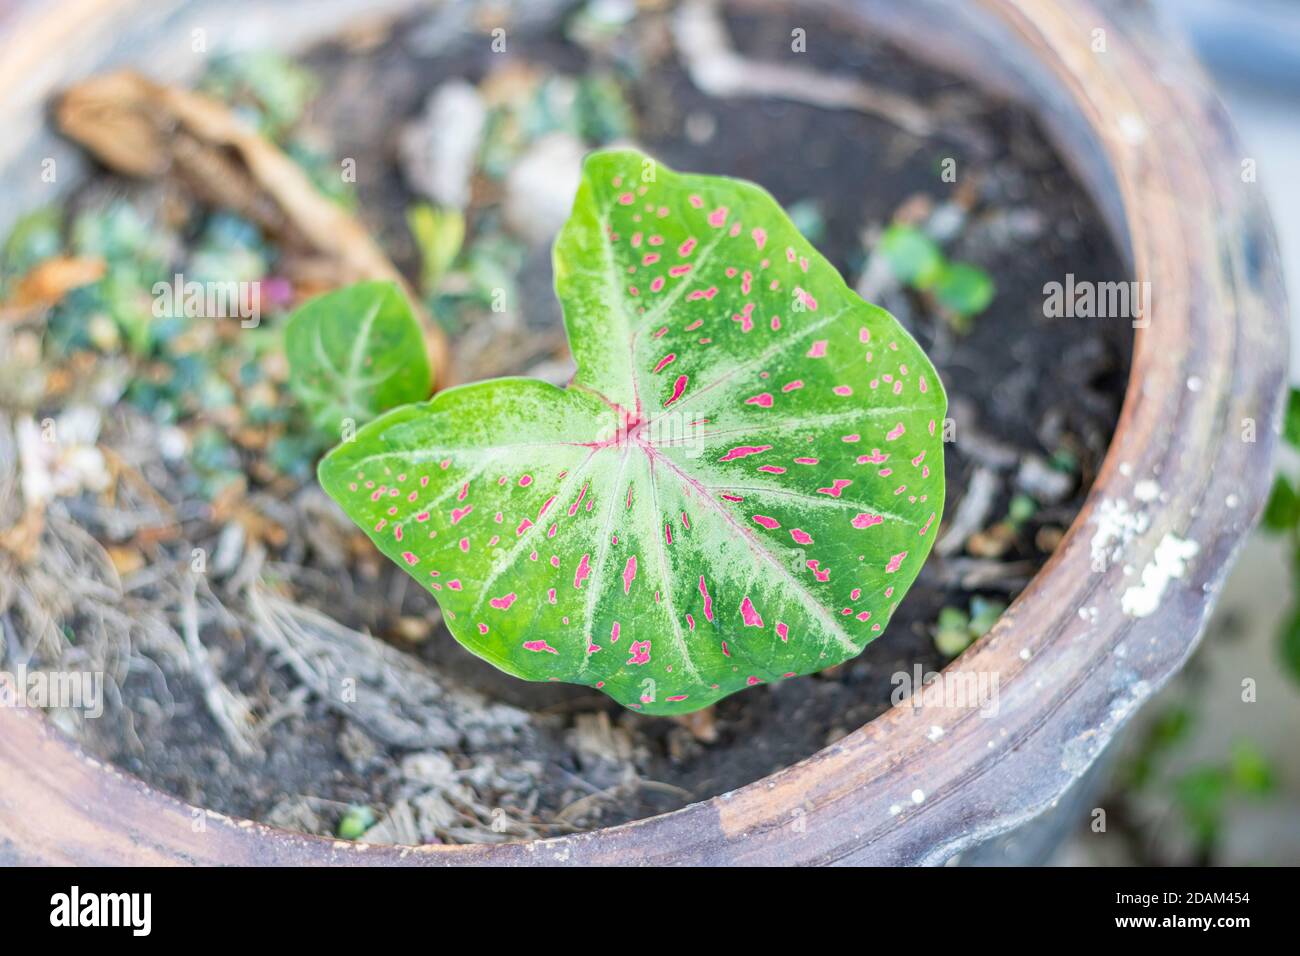 Beautiful leaf contains many pigments on Caladium bicolor Stock Photo